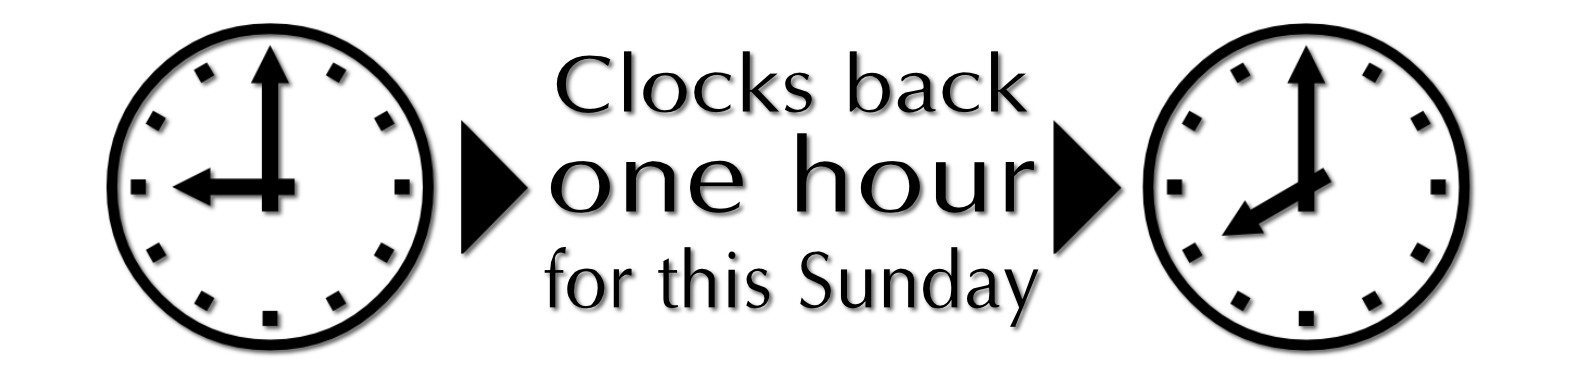 Graphic showing two clocks one hour apart. text: Clocks back one hour for this Sunday